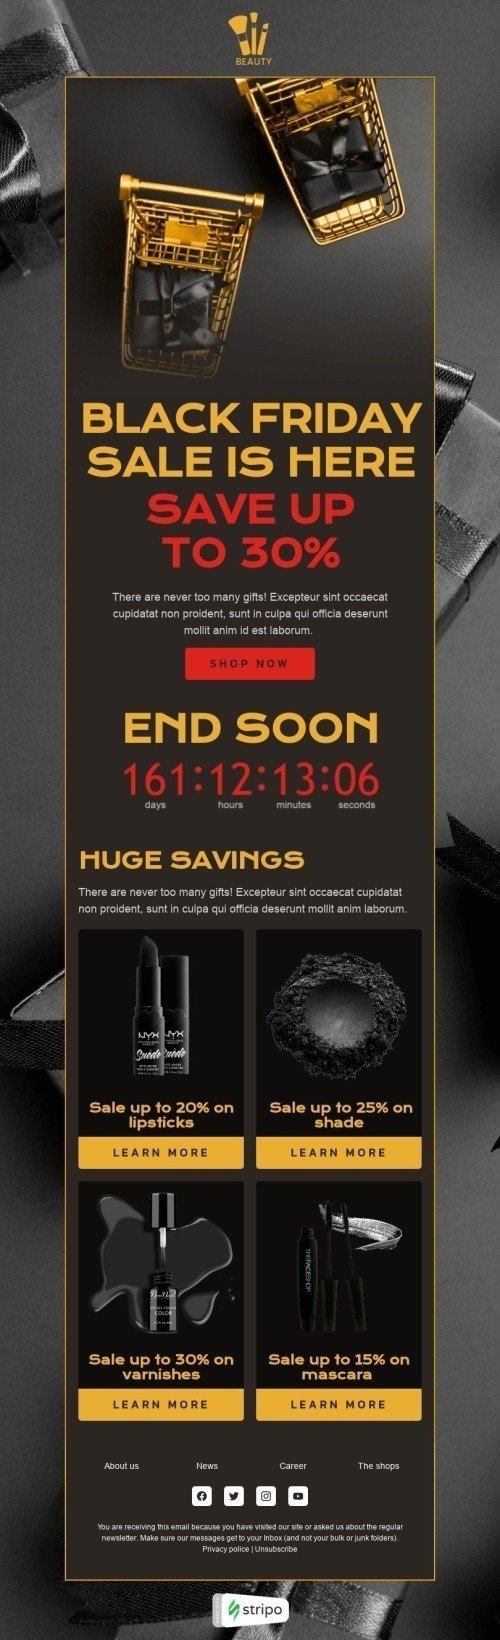 Black Friday Email Template «Huge savings» for Beauty & Personal Care industry desktop view